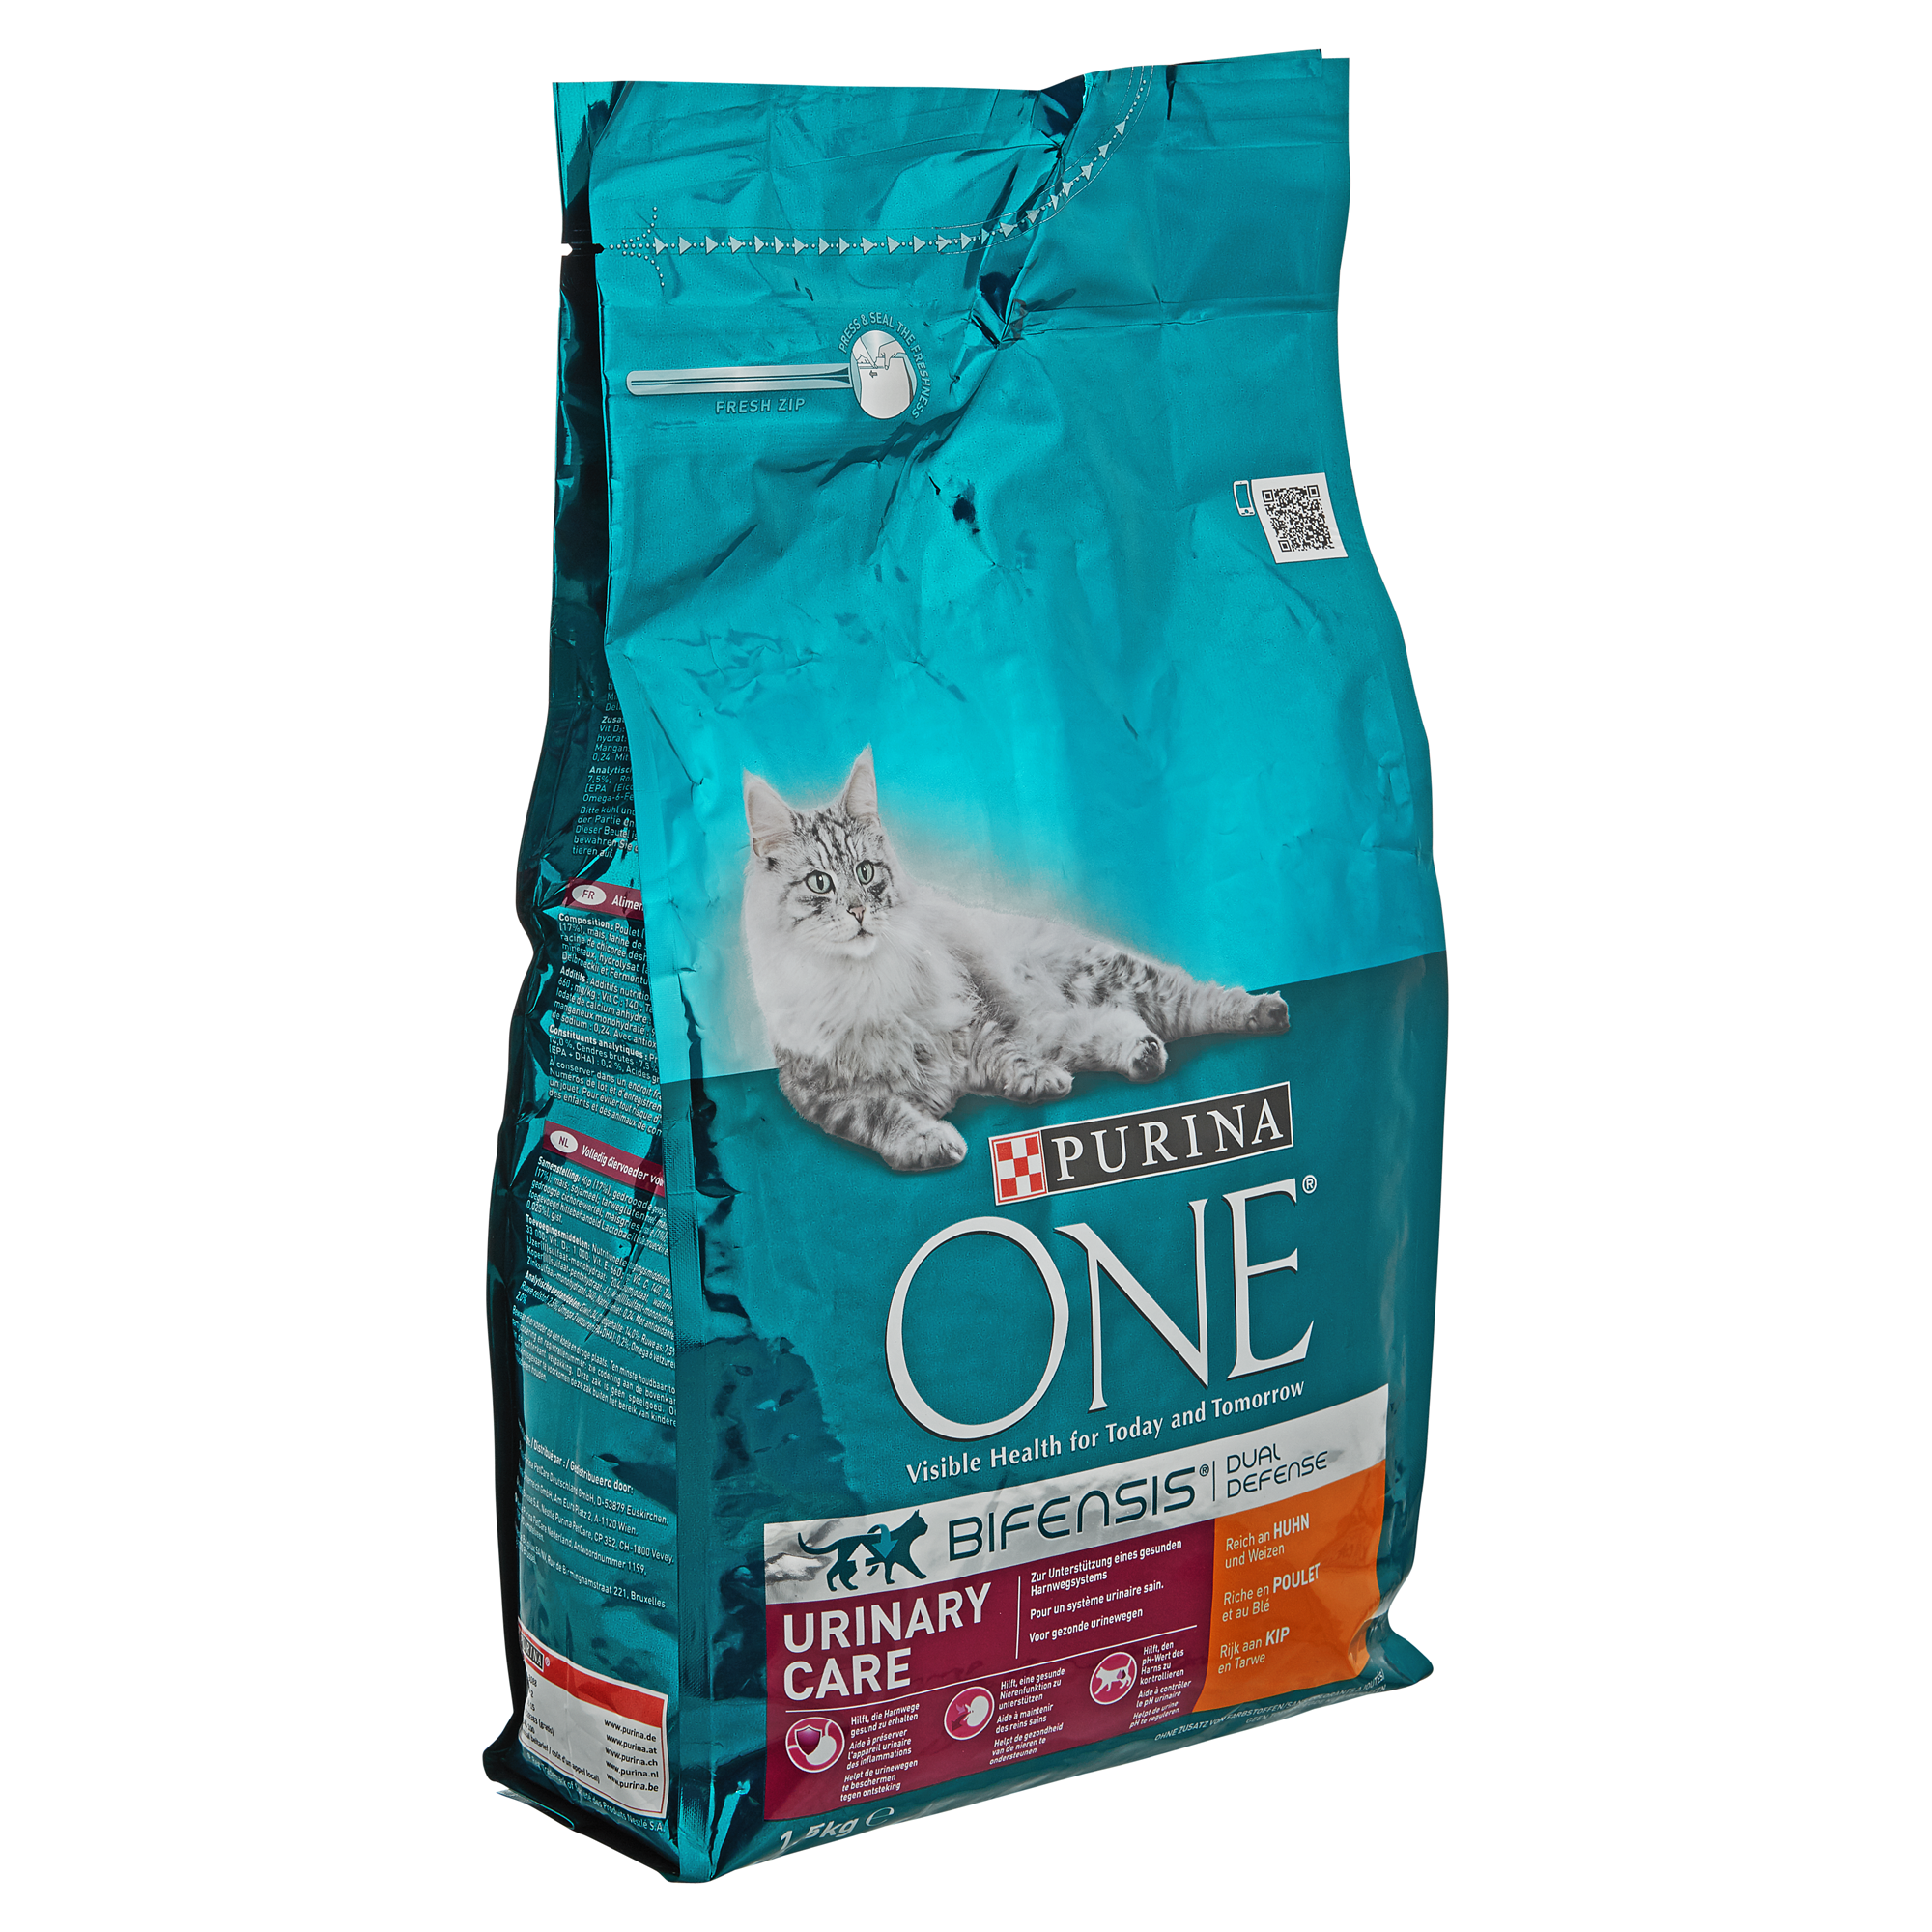 Katzentrockenfutter "ONE Bifensis" Urinary Care mit Huhn 1,5 kg + product picture